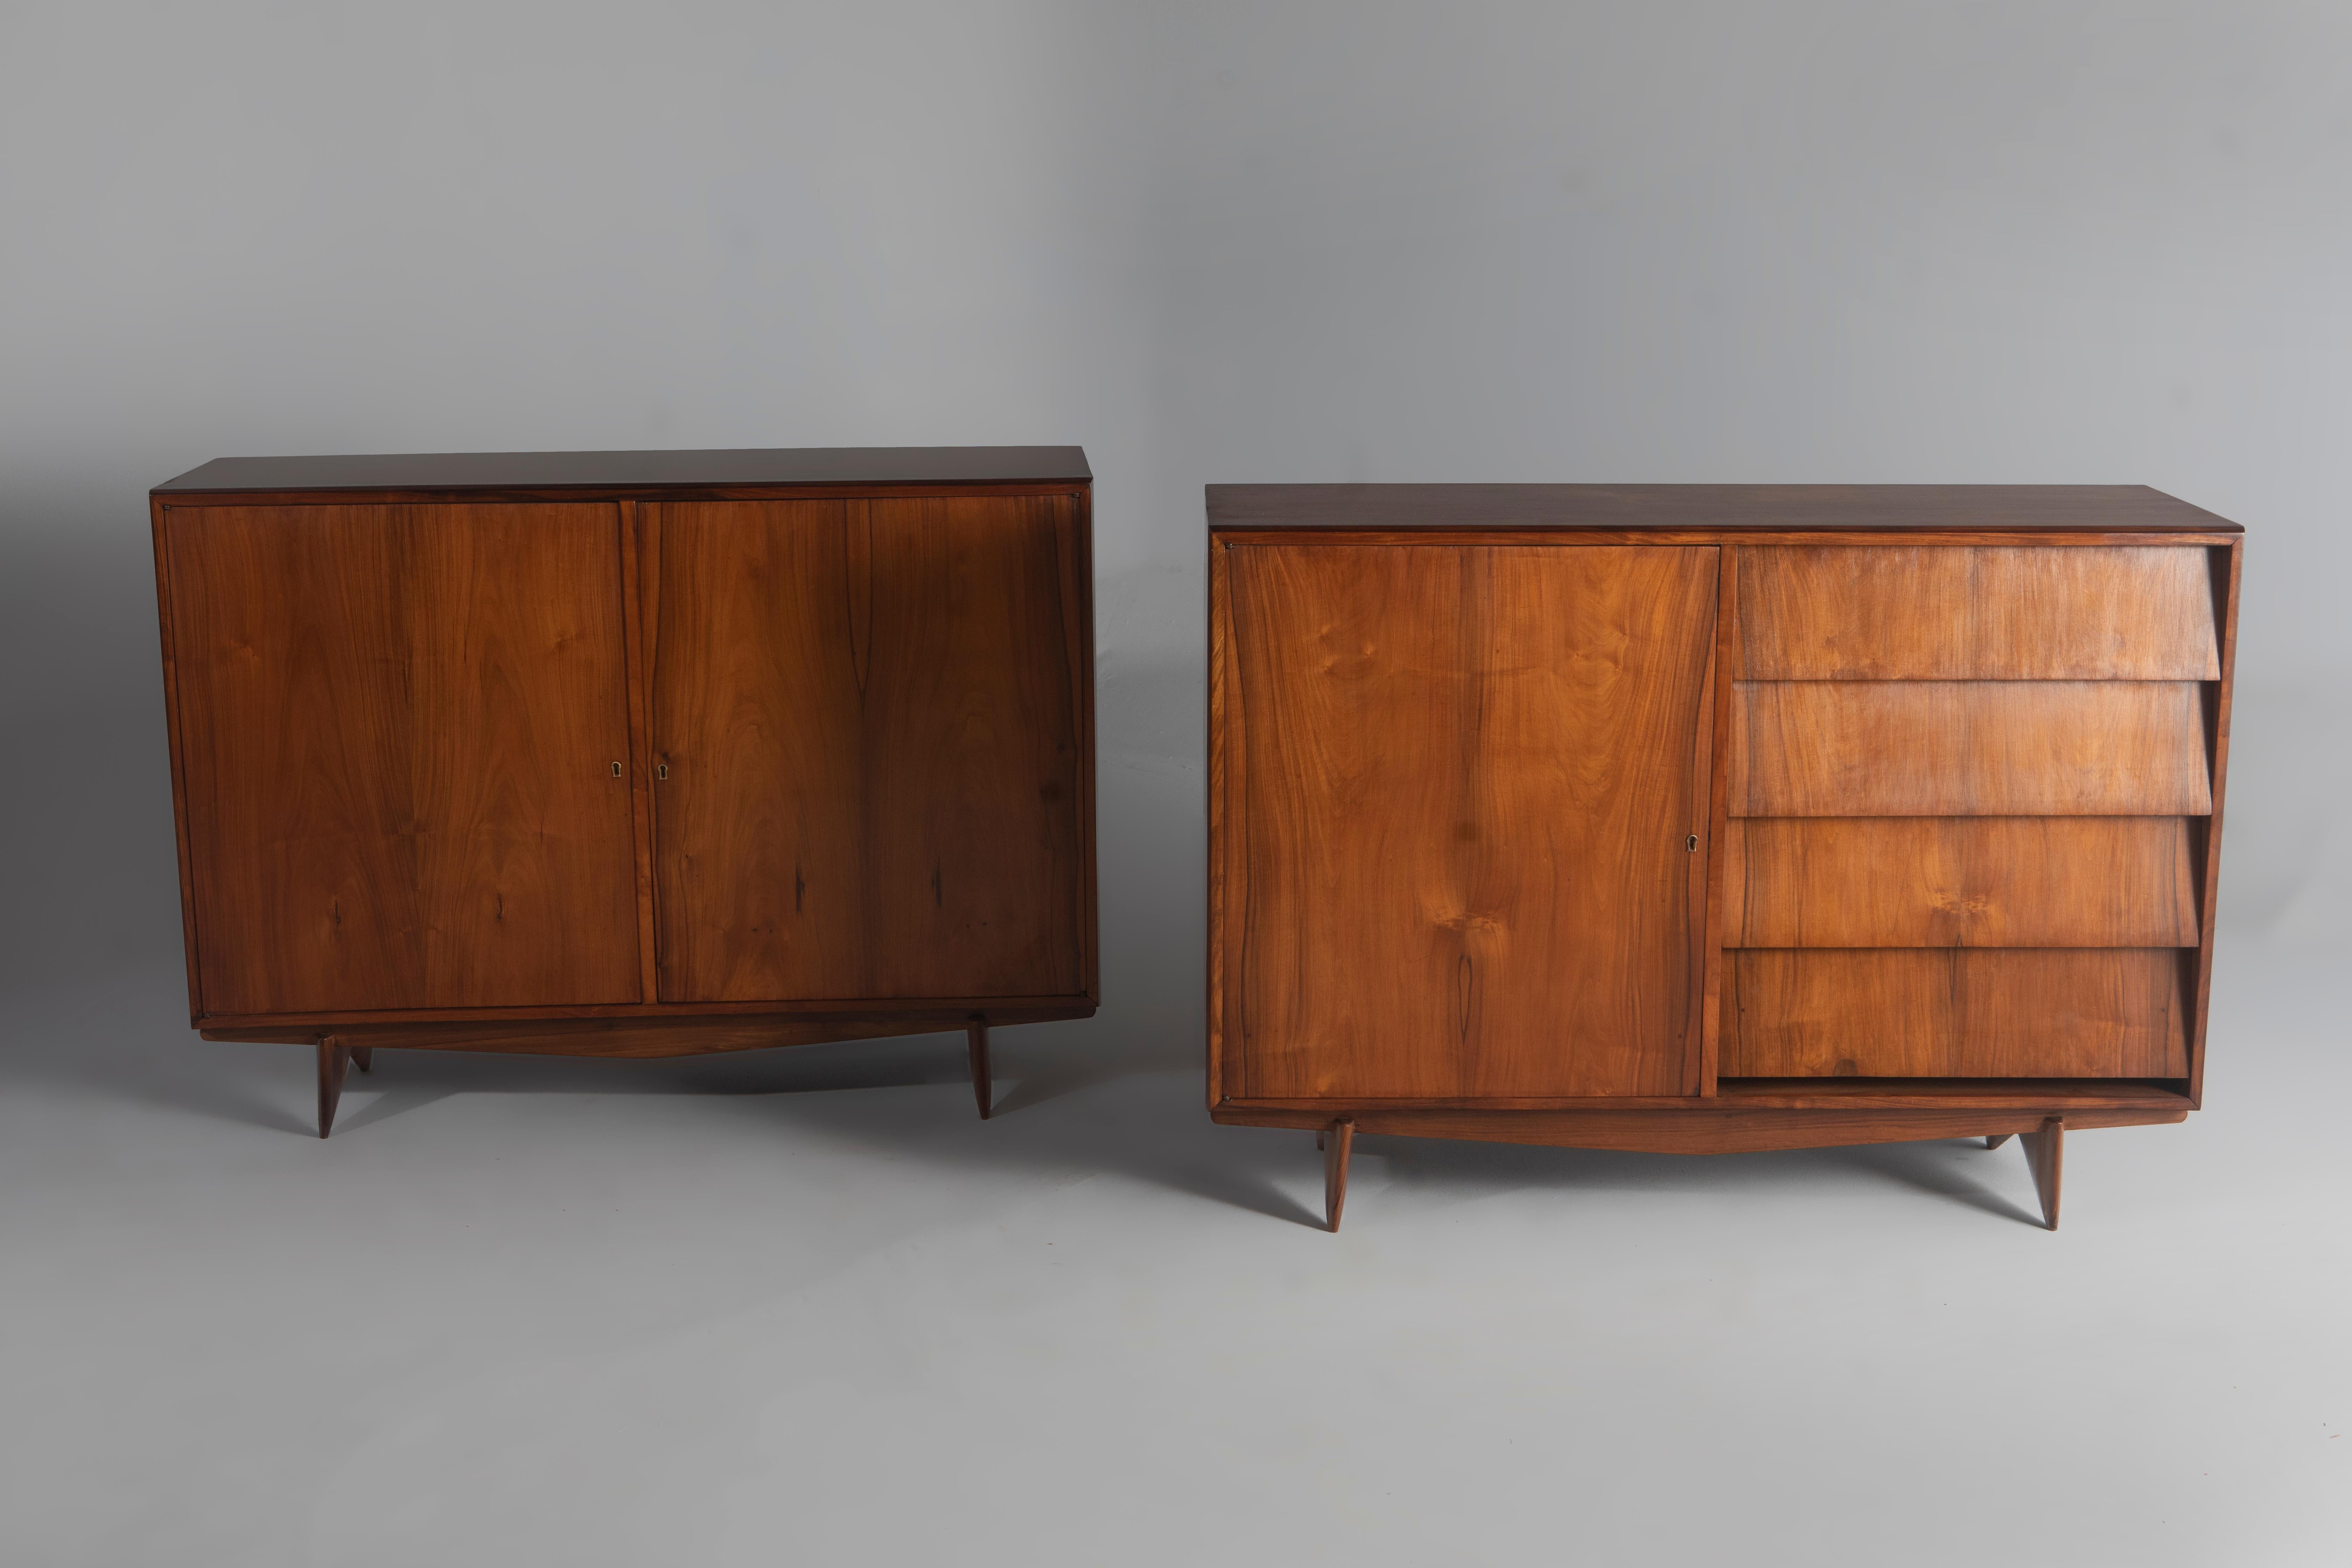 Brazilian Mid-Century Modern Pair of Sideboards by Carlo Hauner, 1950s For Sale